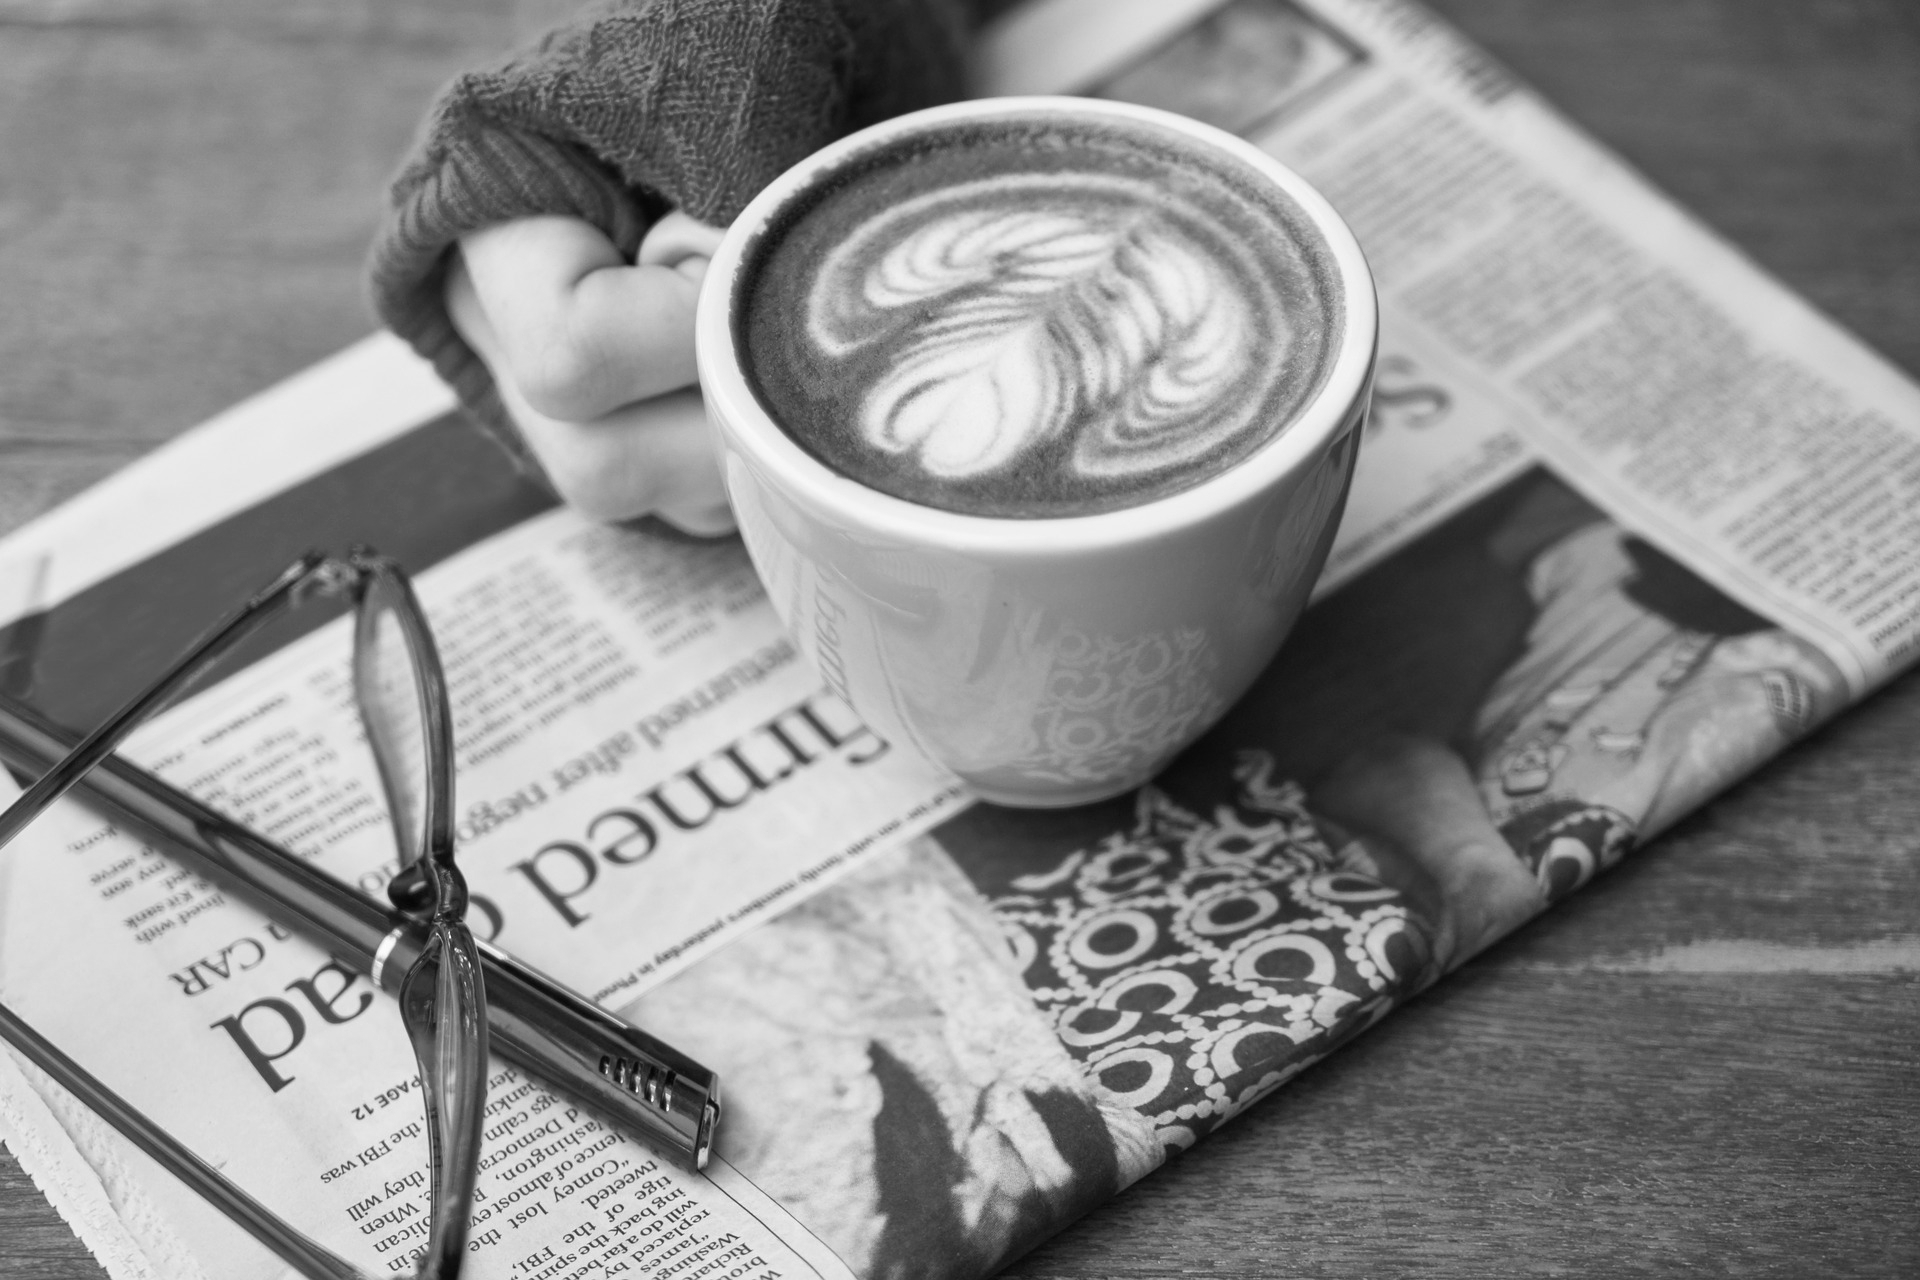 A hand holding a cup of coffee resting on a newspaper